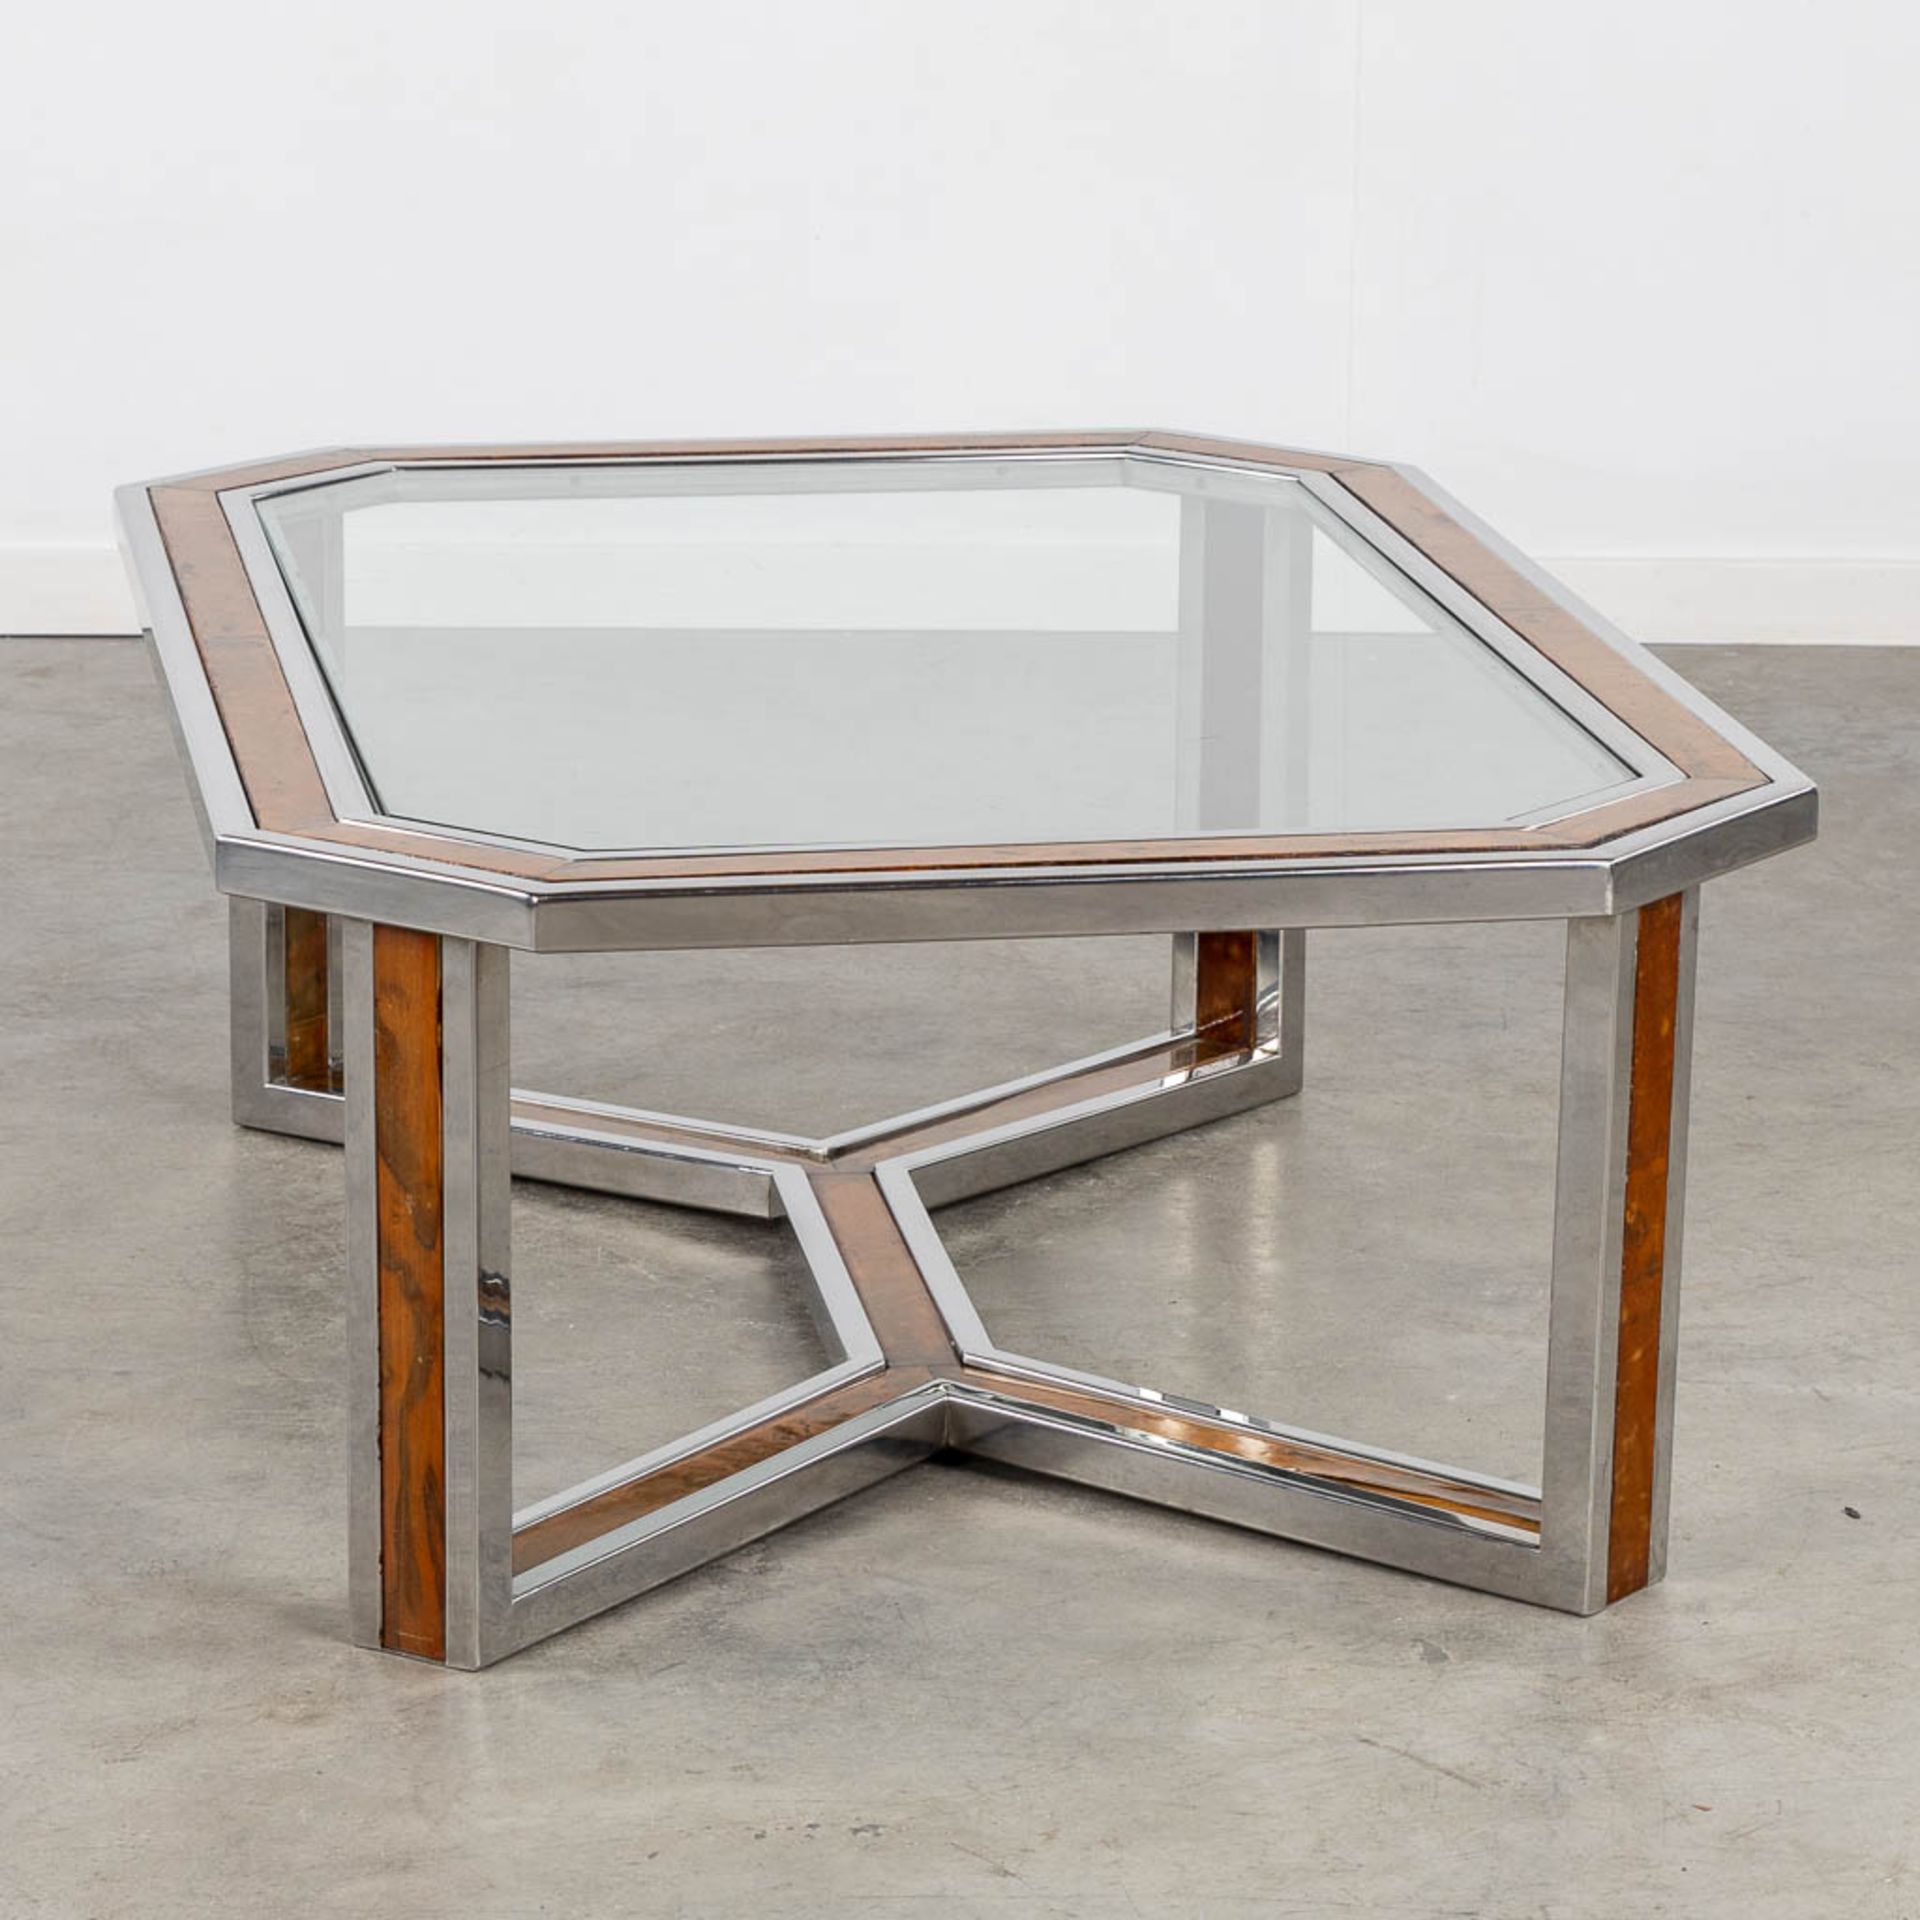 A coffee table, chrome with a faux wood inlay and a glass top. (L:80 x W:120 x H:40 cm) - Bild 6 aus 10